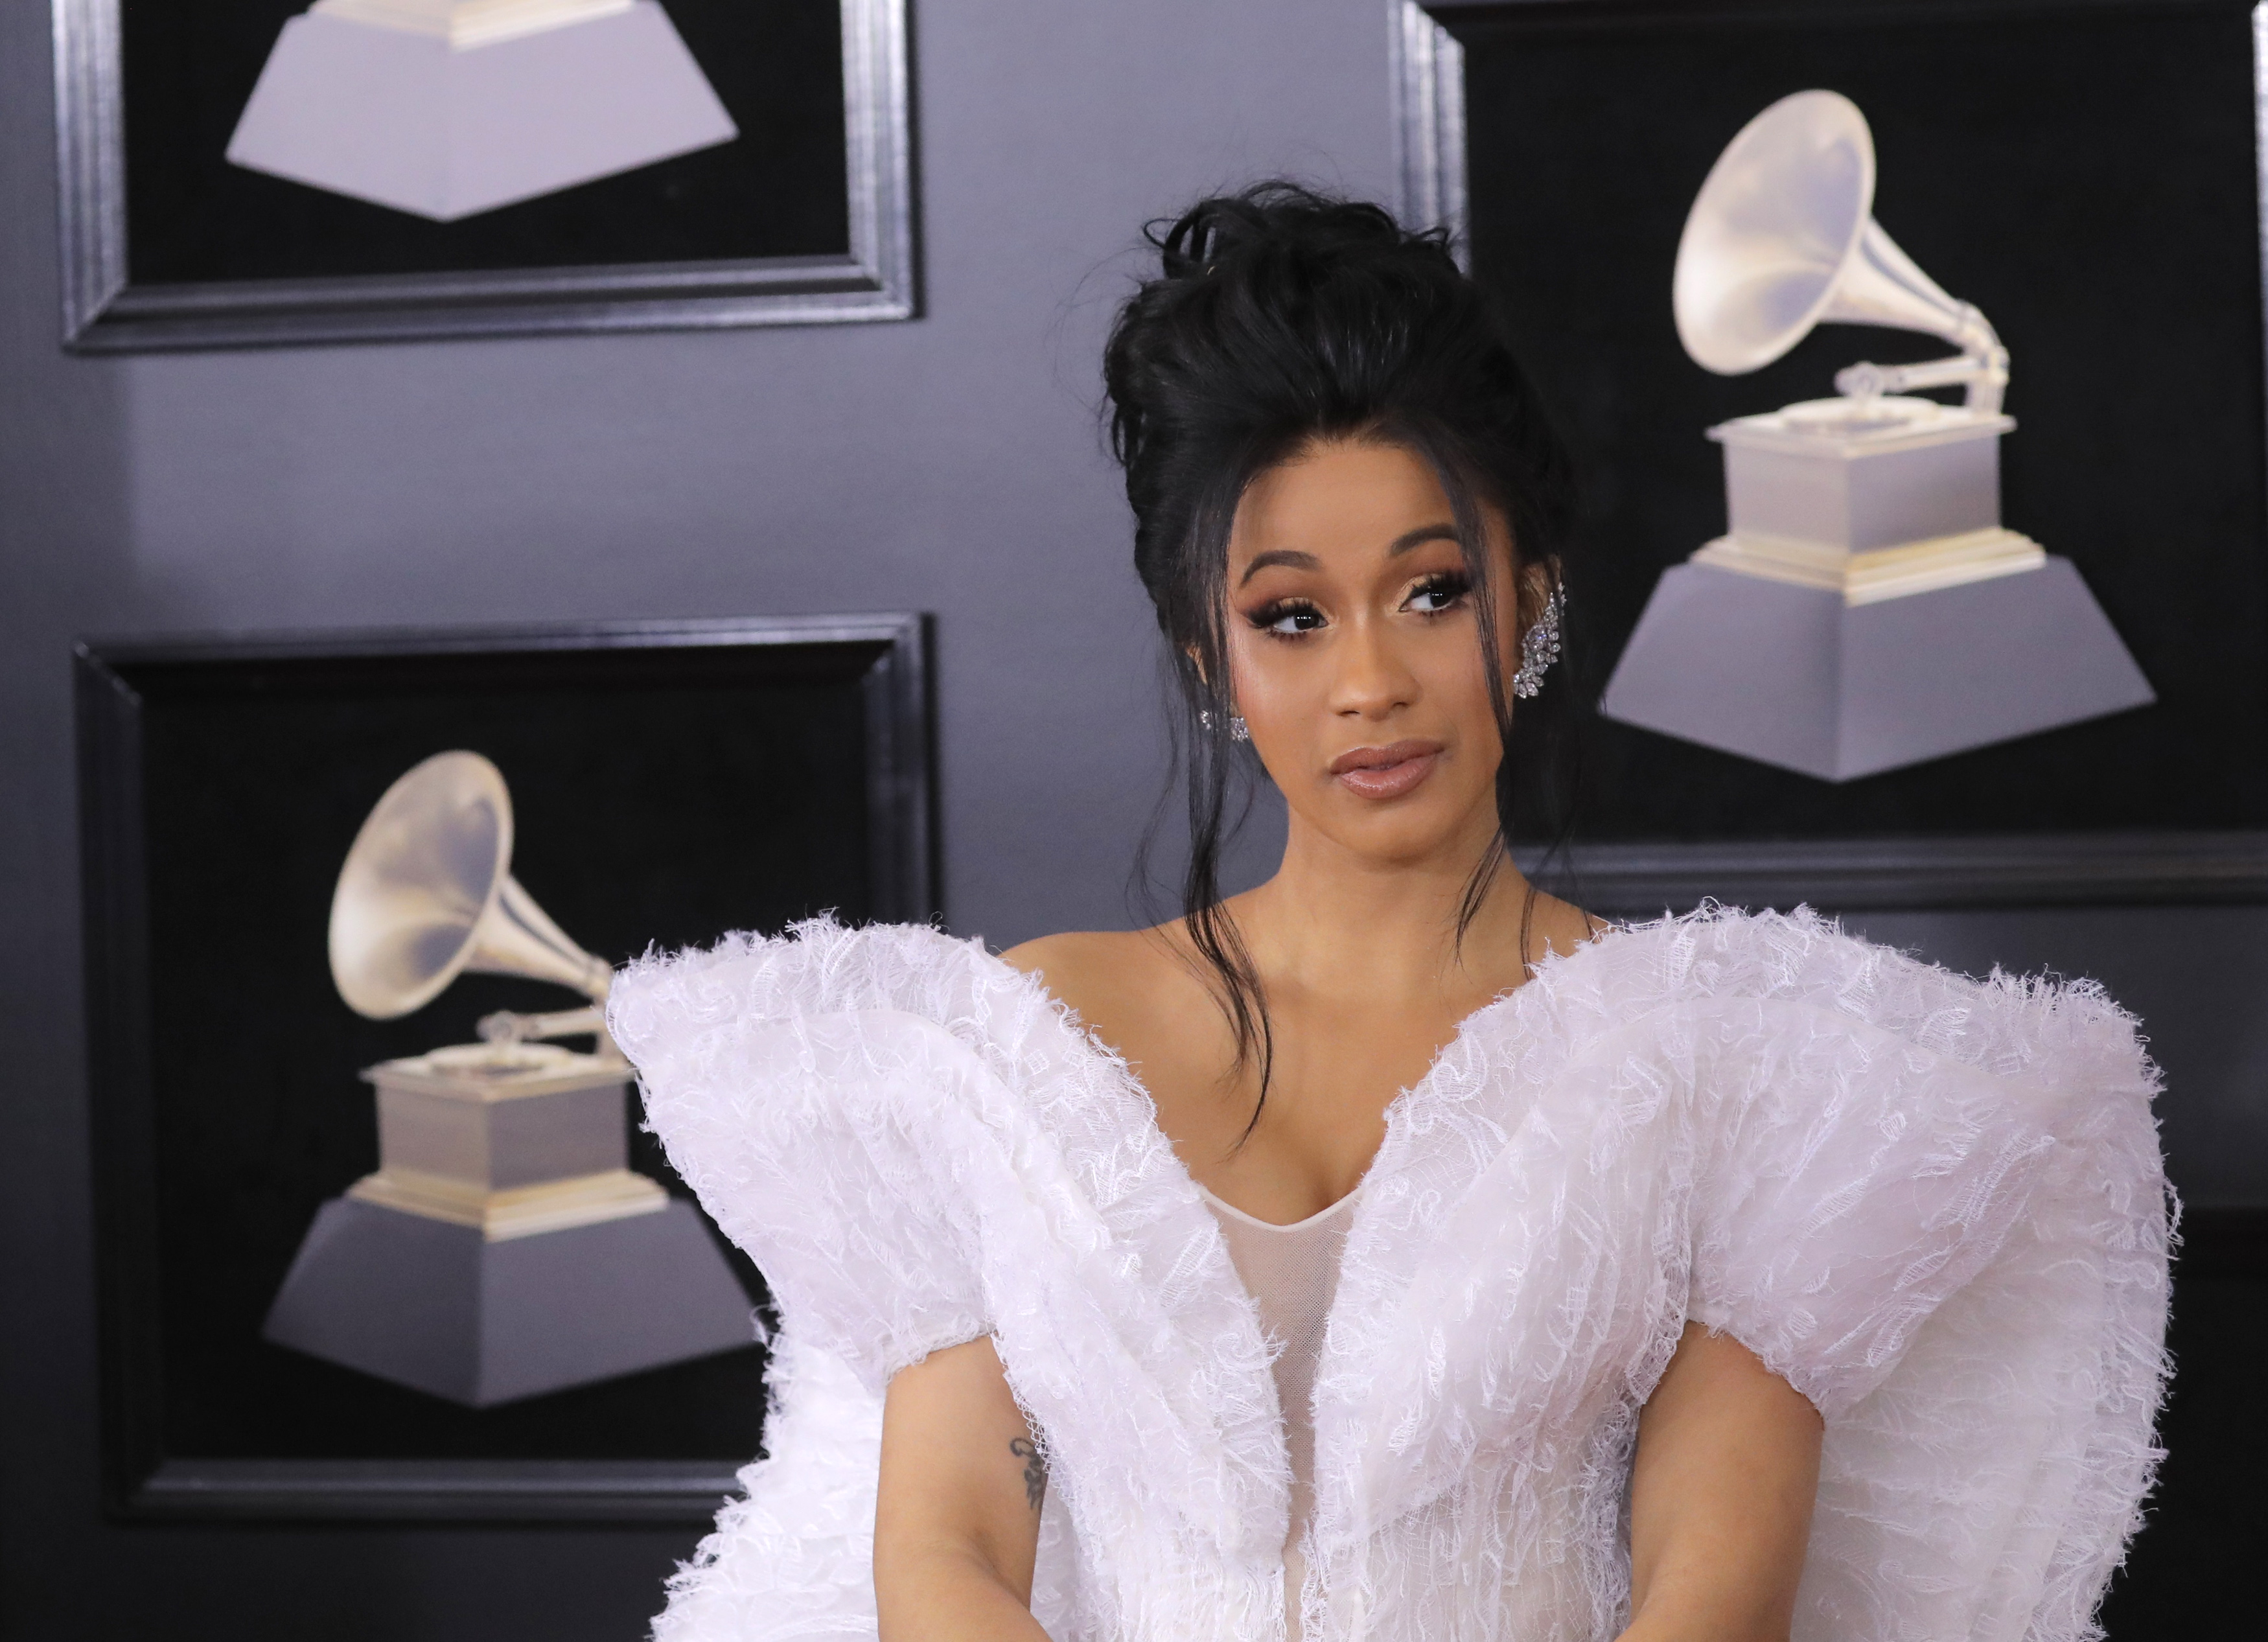 Cardi B arrives at the 60th Annual Grammy Awards in New York City on Jan. 28, 2018. The rapper is being sued by her former manager for $10 million. (Andrew Kelly—Reuters)